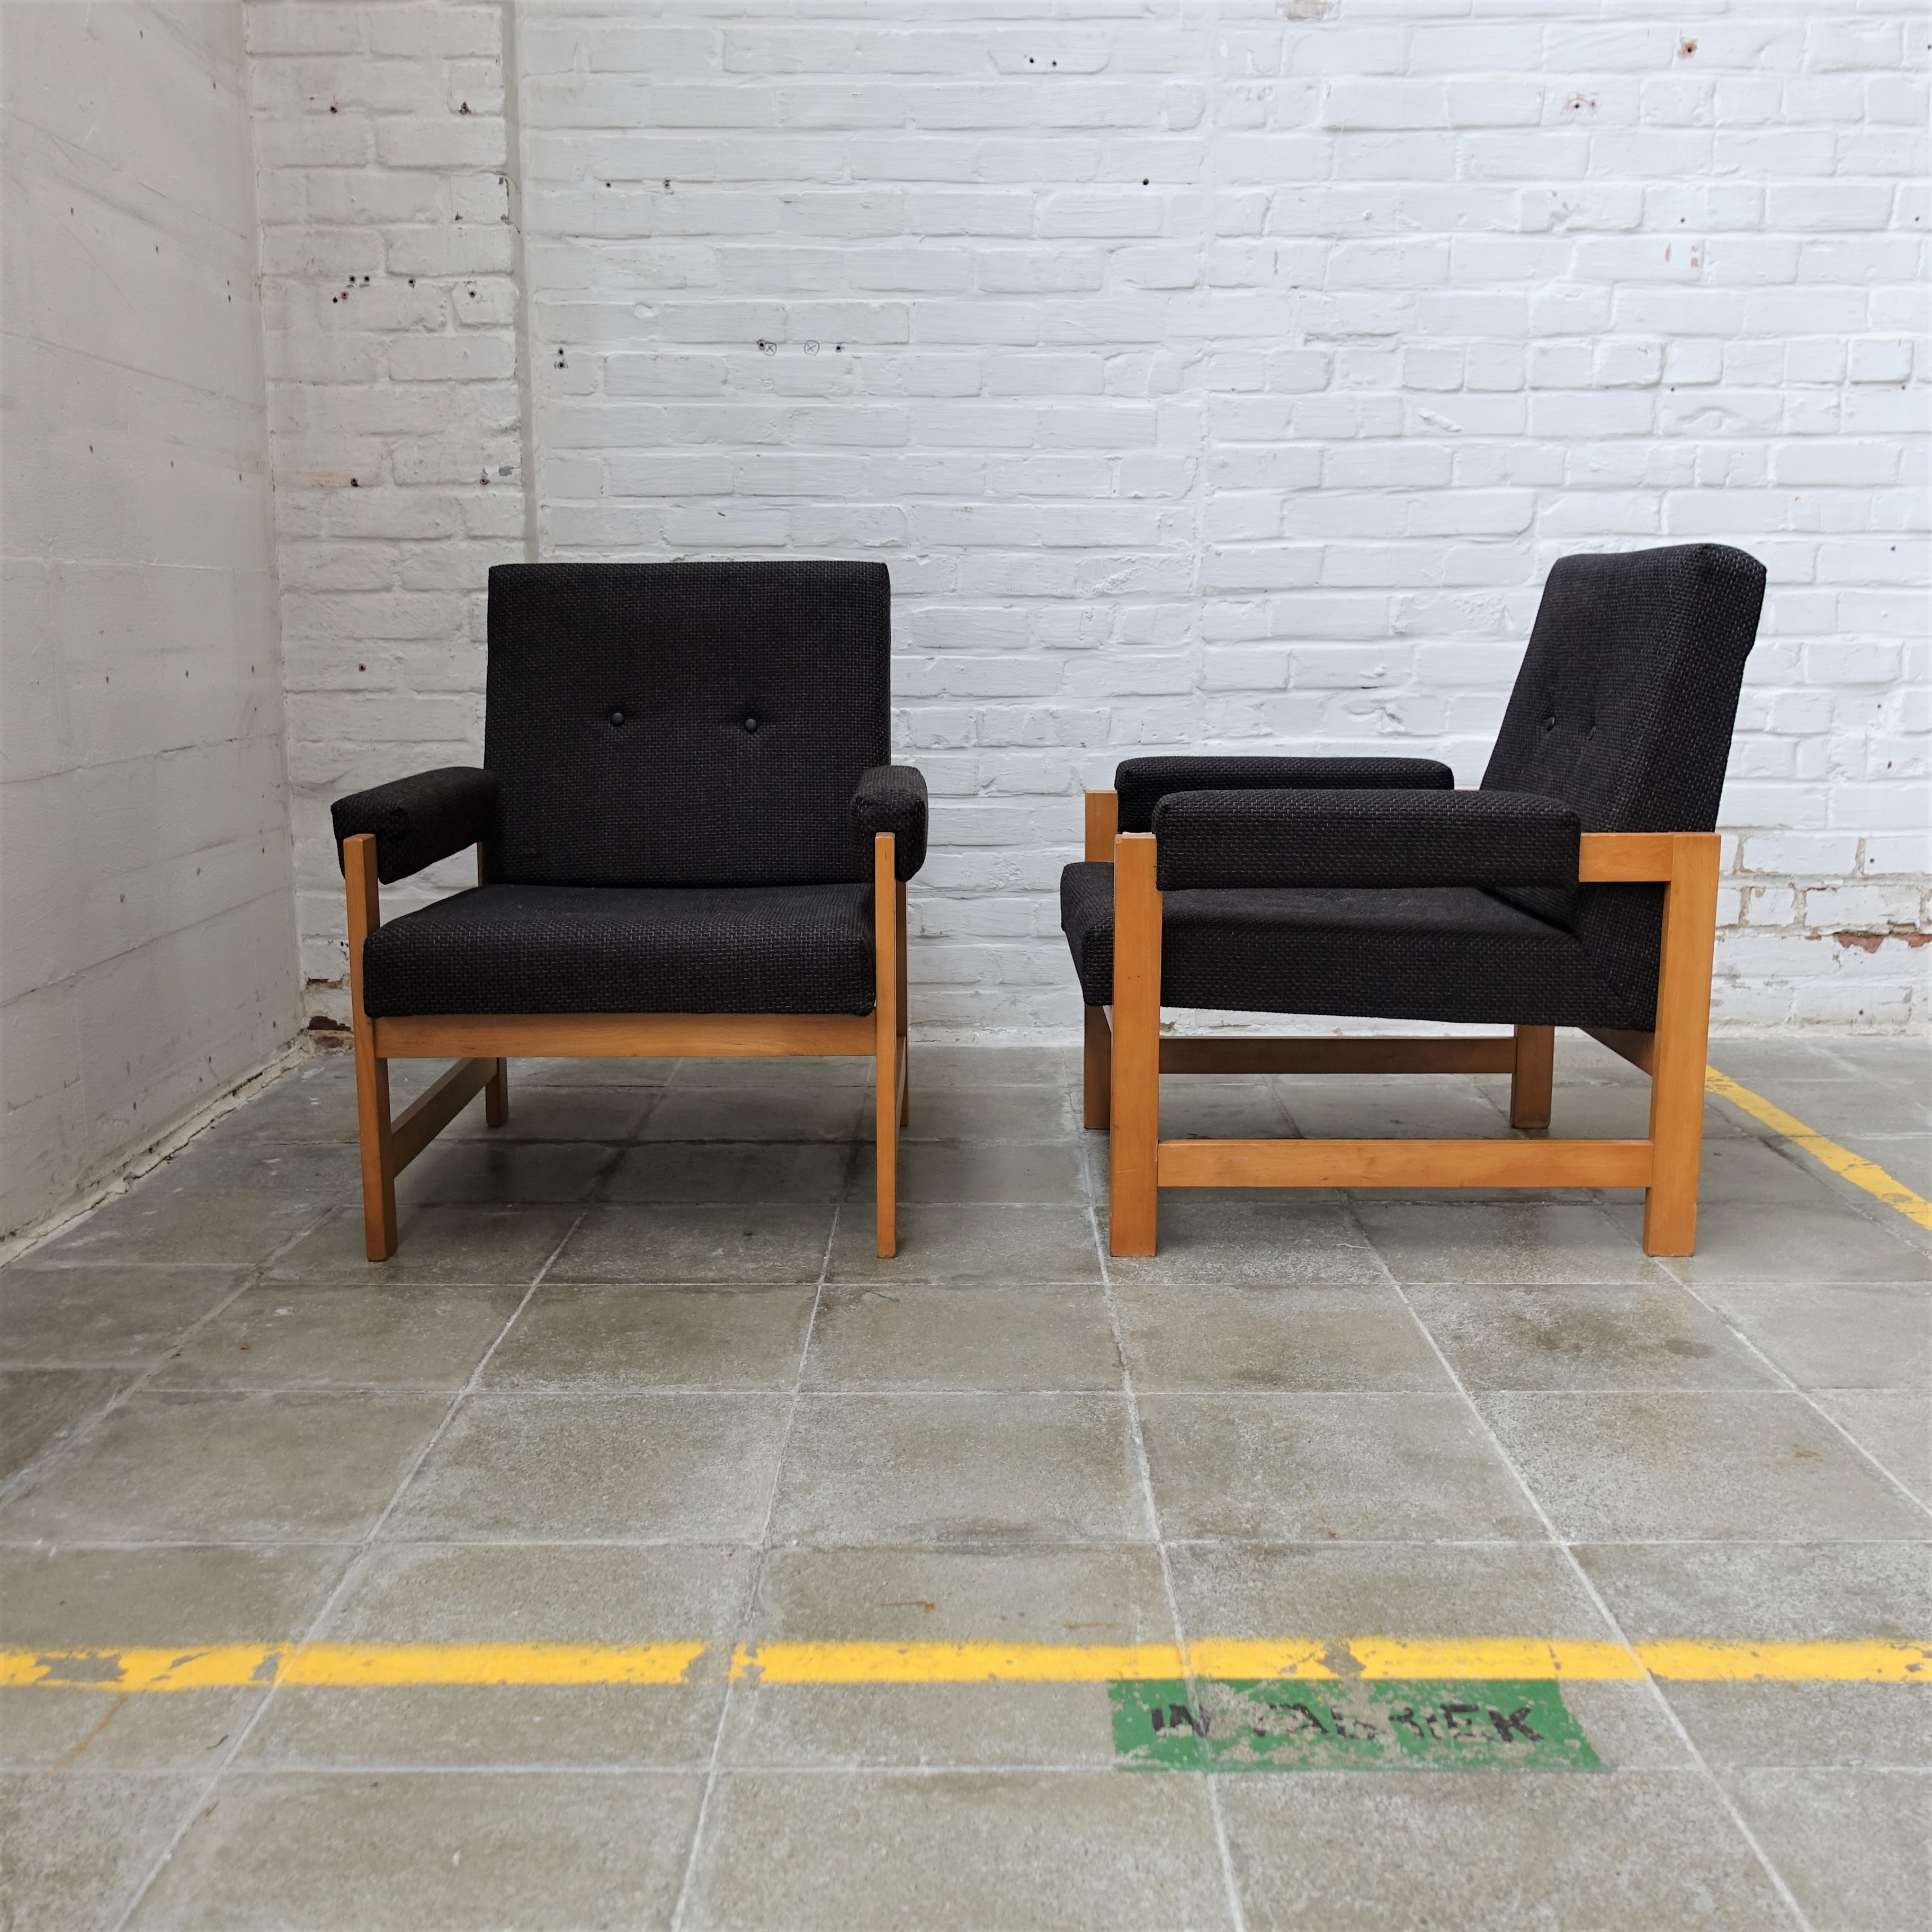 Set of 2 midcentury upholstered chairs | Bold Design